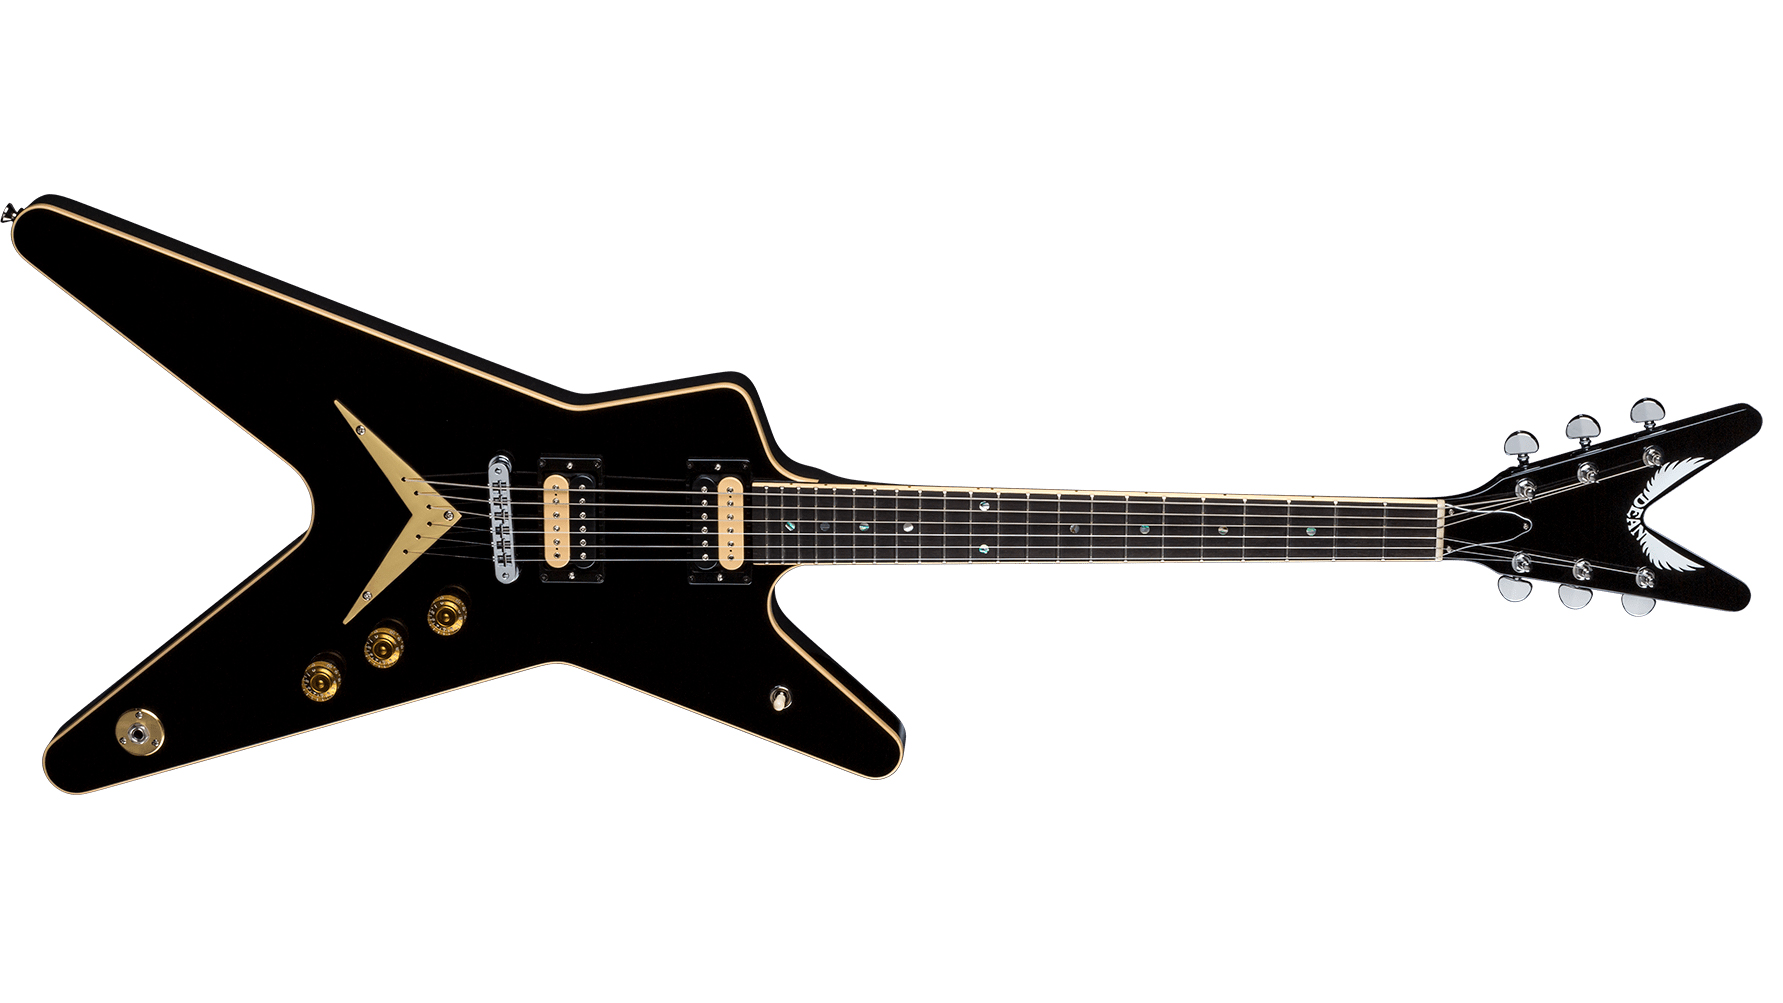 Dean Guitars goes back in time with the Patents Pending series